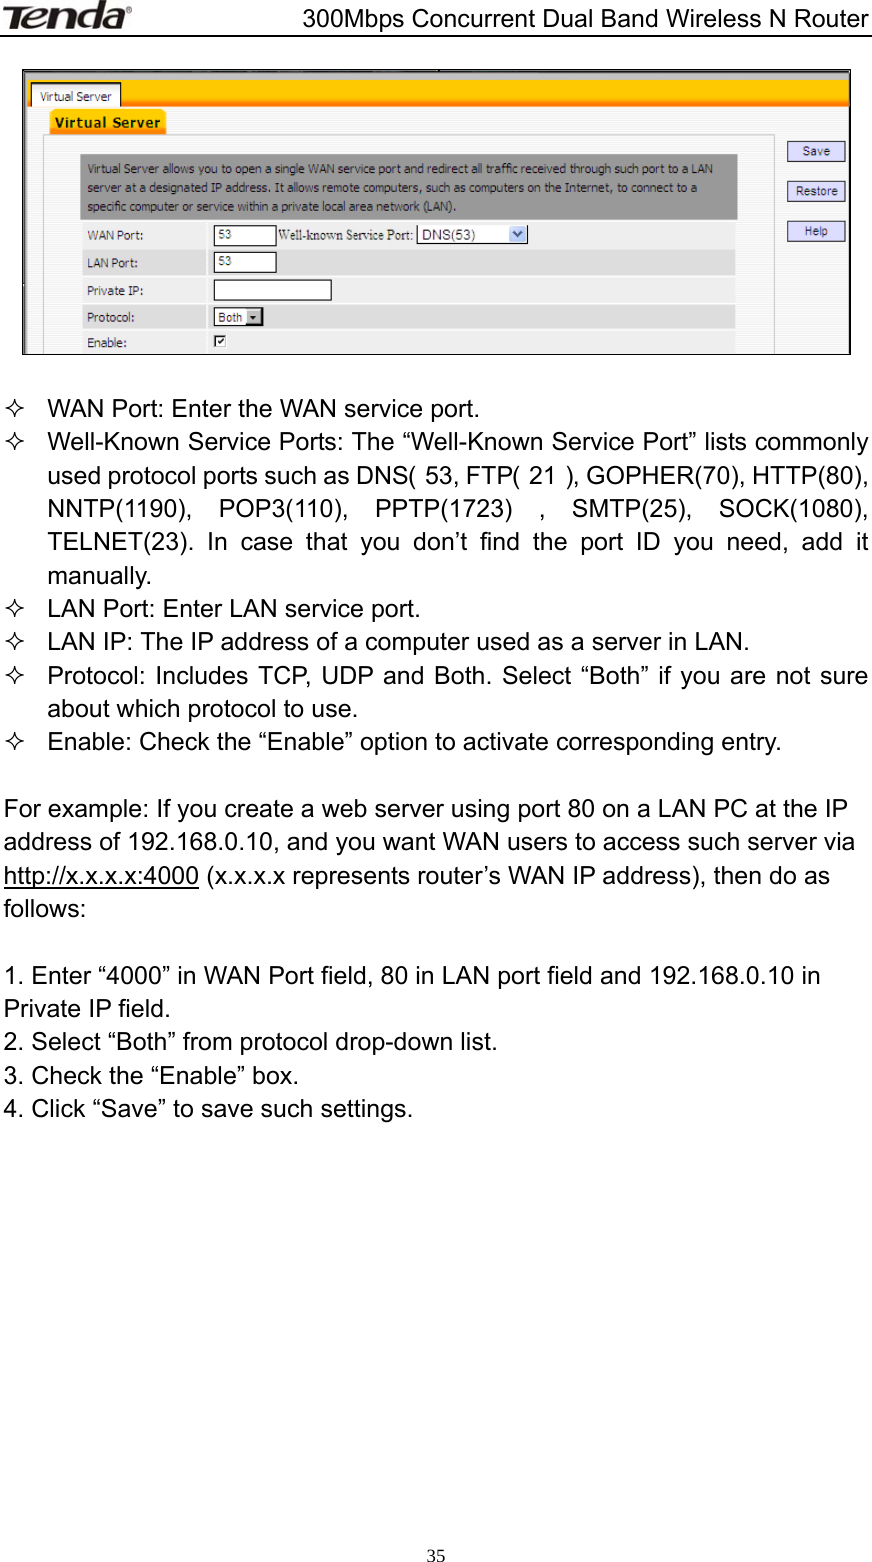                       300Mbps Concurrent Dual Band Wireless N Router  35    WAN Port: Enter the WAN service port.   Well-Known Service Ports: The “Well-Known Service Port” lists commonly used protocol ports such as DNS（53, FTP（21）, GOPHER(70), HTTP(80), NNTP(1190), POP3(110), PPTP(1723) , SMTP(25), SOCK(1080), TELNET(23). In case that you don’t find the port ID you need, add it manually.   LAN Port: Enter LAN service port.   LAN IP: The IP address of a computer used as a server in LAN.   Protocol: Includes TCP, UDP and Both. Select “Both” if you are not sure about which protocol to use.   Enable: Check the “Enable” option to activate corresponding entry.  For example: If you create a web server using port 80 on a LAN PC at the IP address of 192.168.0.10, and you want WAN users to access such server via http://x.x.x.x:4000 (x.x.x.x represents router’s WAN IP address), then do as follows:  1. Enter “4000” in WAN Port field, 80 in LAN port field and 192.168.0.10 in Private IP field. 2. Select “Both” from protocol drop-down list. 3. Check the “Enable” box. 4. Click “Save” to save such settings.     